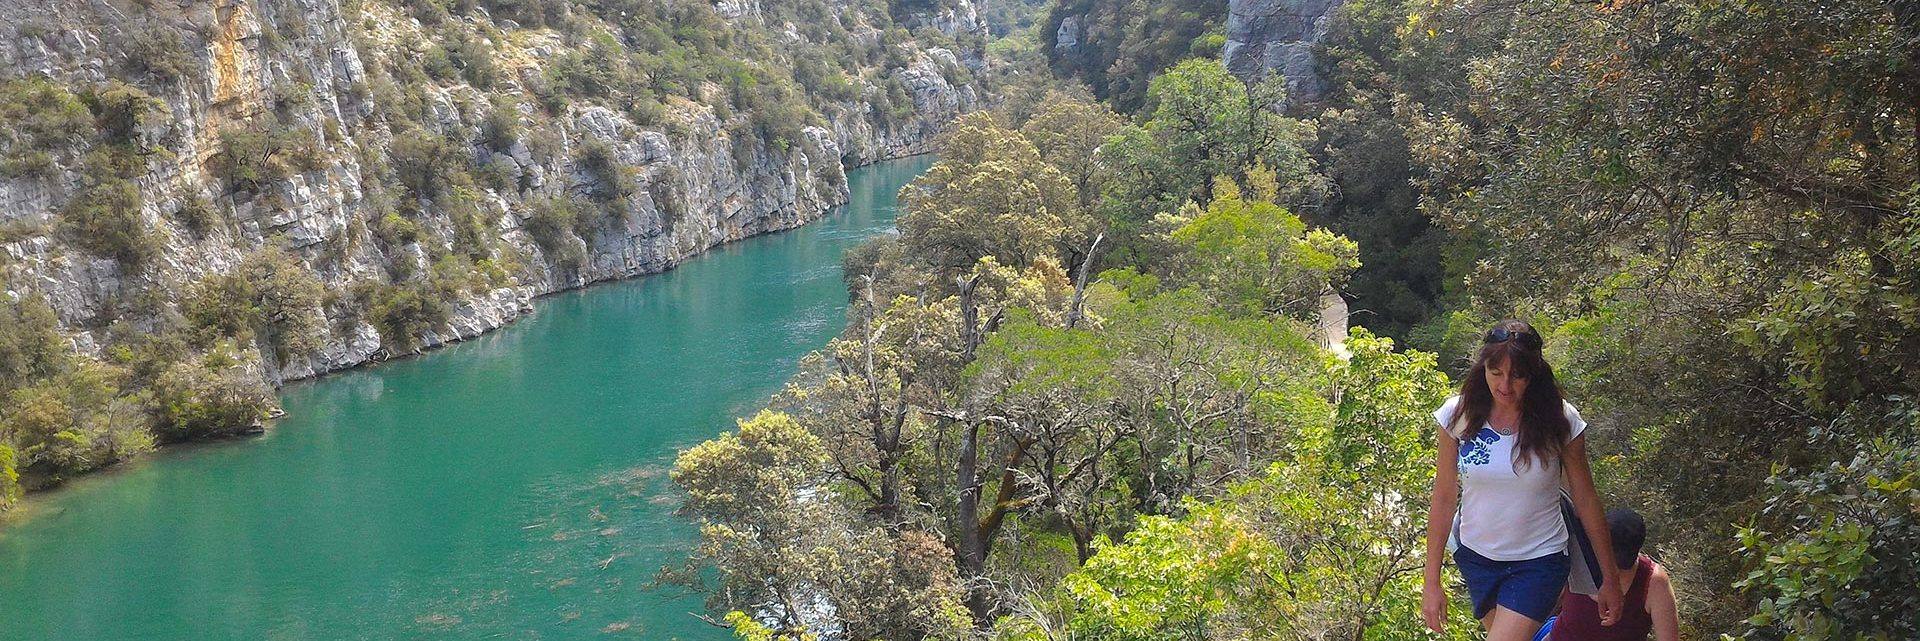 Hiking in the Verdon Gorges